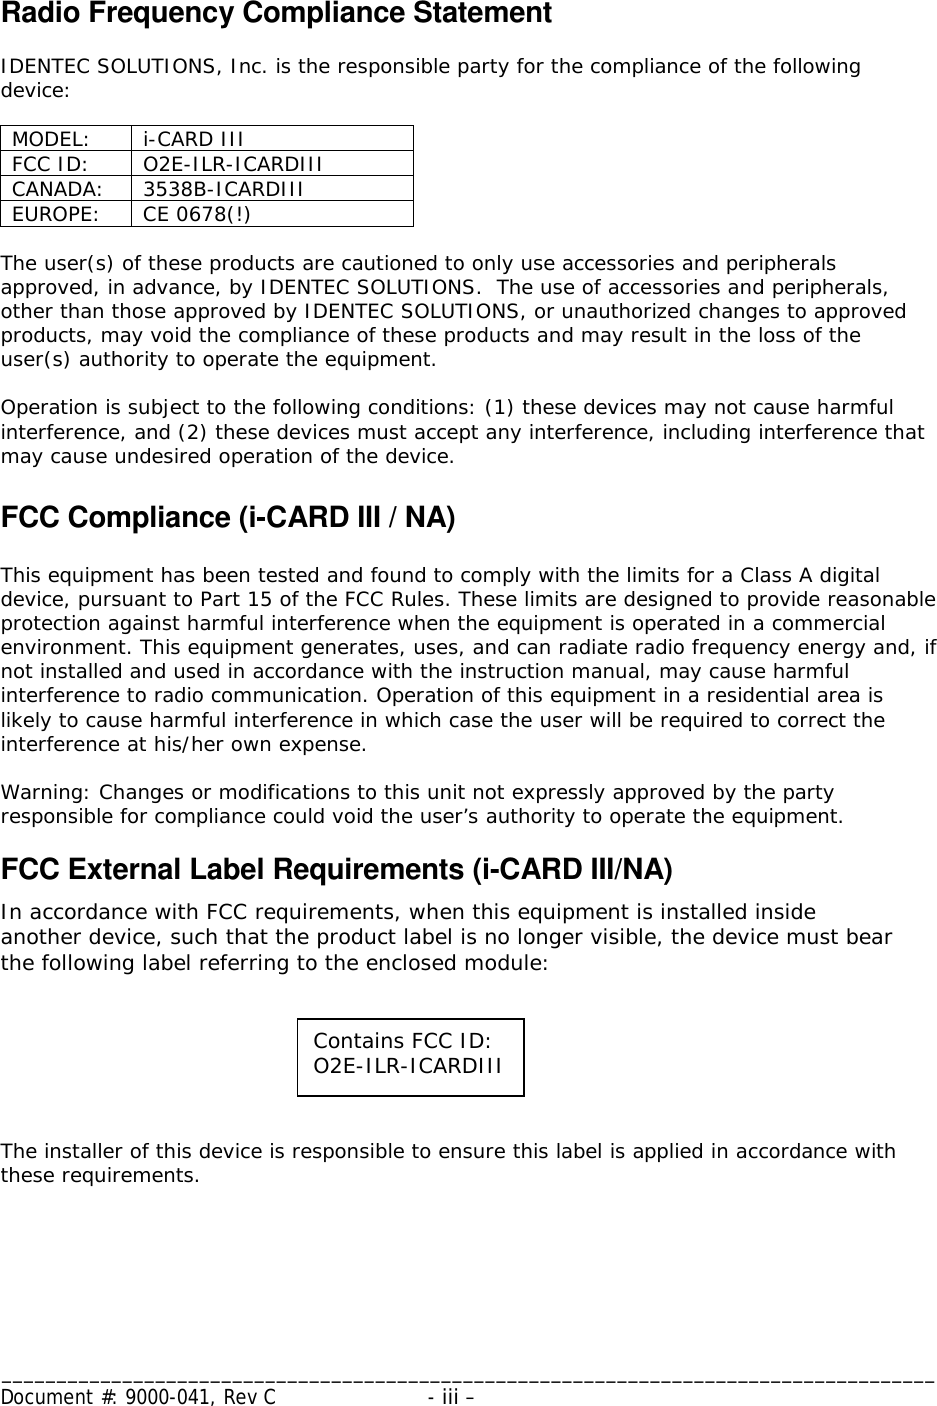 _____________________________________________________________________________________ Document #: 9000-041, Rev C  - iii –    Radio Frequency Compliance Statement  IDENTEC SOLUTIONS, Inc. is the responsible party for the compliance of the following device:  MODEL: i-CARD III FCC ID:  O2E-ILR-ICARDIII CANADA: 3538B-ICARDIII EUROPE: CE 0678(!)  The user(s) of these products are cautioned to only use accessories and peripherals approved, in advance, by IDENTEC SOLUTIONS.  The use of accessories and peripherals, other than those approved by IDENTEC SOLUTIONS, or unauthorized changes to approved products, may void the compliance of these products and may result in the loss of the user(s) authority to operate the equipment.  Operation is subject to the following conditions: (1) these devices may not cause harmful interference, and (2) these devices must accept any interference, including interference that may cause undesired operation of the device.  FCC Compliance (i-CARD III / NA)  This equipment has been tested and found to comply with the limits for a Class A digital device, pursuant to Part 15 of the FCC Rules. These limits are designed to provide reasonable protection against harmful interference when the equipment is operated in a commercial environment. This equipment generates, uses, and can radiate radio frequency energy and, if not installed and used in accordance with the instruction manual, may cause harmful interference to radio communication. Operation of this equipment in a residential area is likely to cause harmful interference in which case the user will be required to correct the interference at his/her own expense.  Warning: Changes or modifications to this unit not expressly approved by the party responsible for compliance could void the user’s authority to operate the equipment. FCC External Label Requirements (i-CARD III/NA) In accordance with FCC requirements, when this equipment is installed inside another device, such that the product label is no longer visible, the device must bear the following label referring to the enclosed module:     The installer of this device is responsible to ensure this label is applied in accordance with these requirements. Contains FCC ID: O2E-ILR-ICARDIII